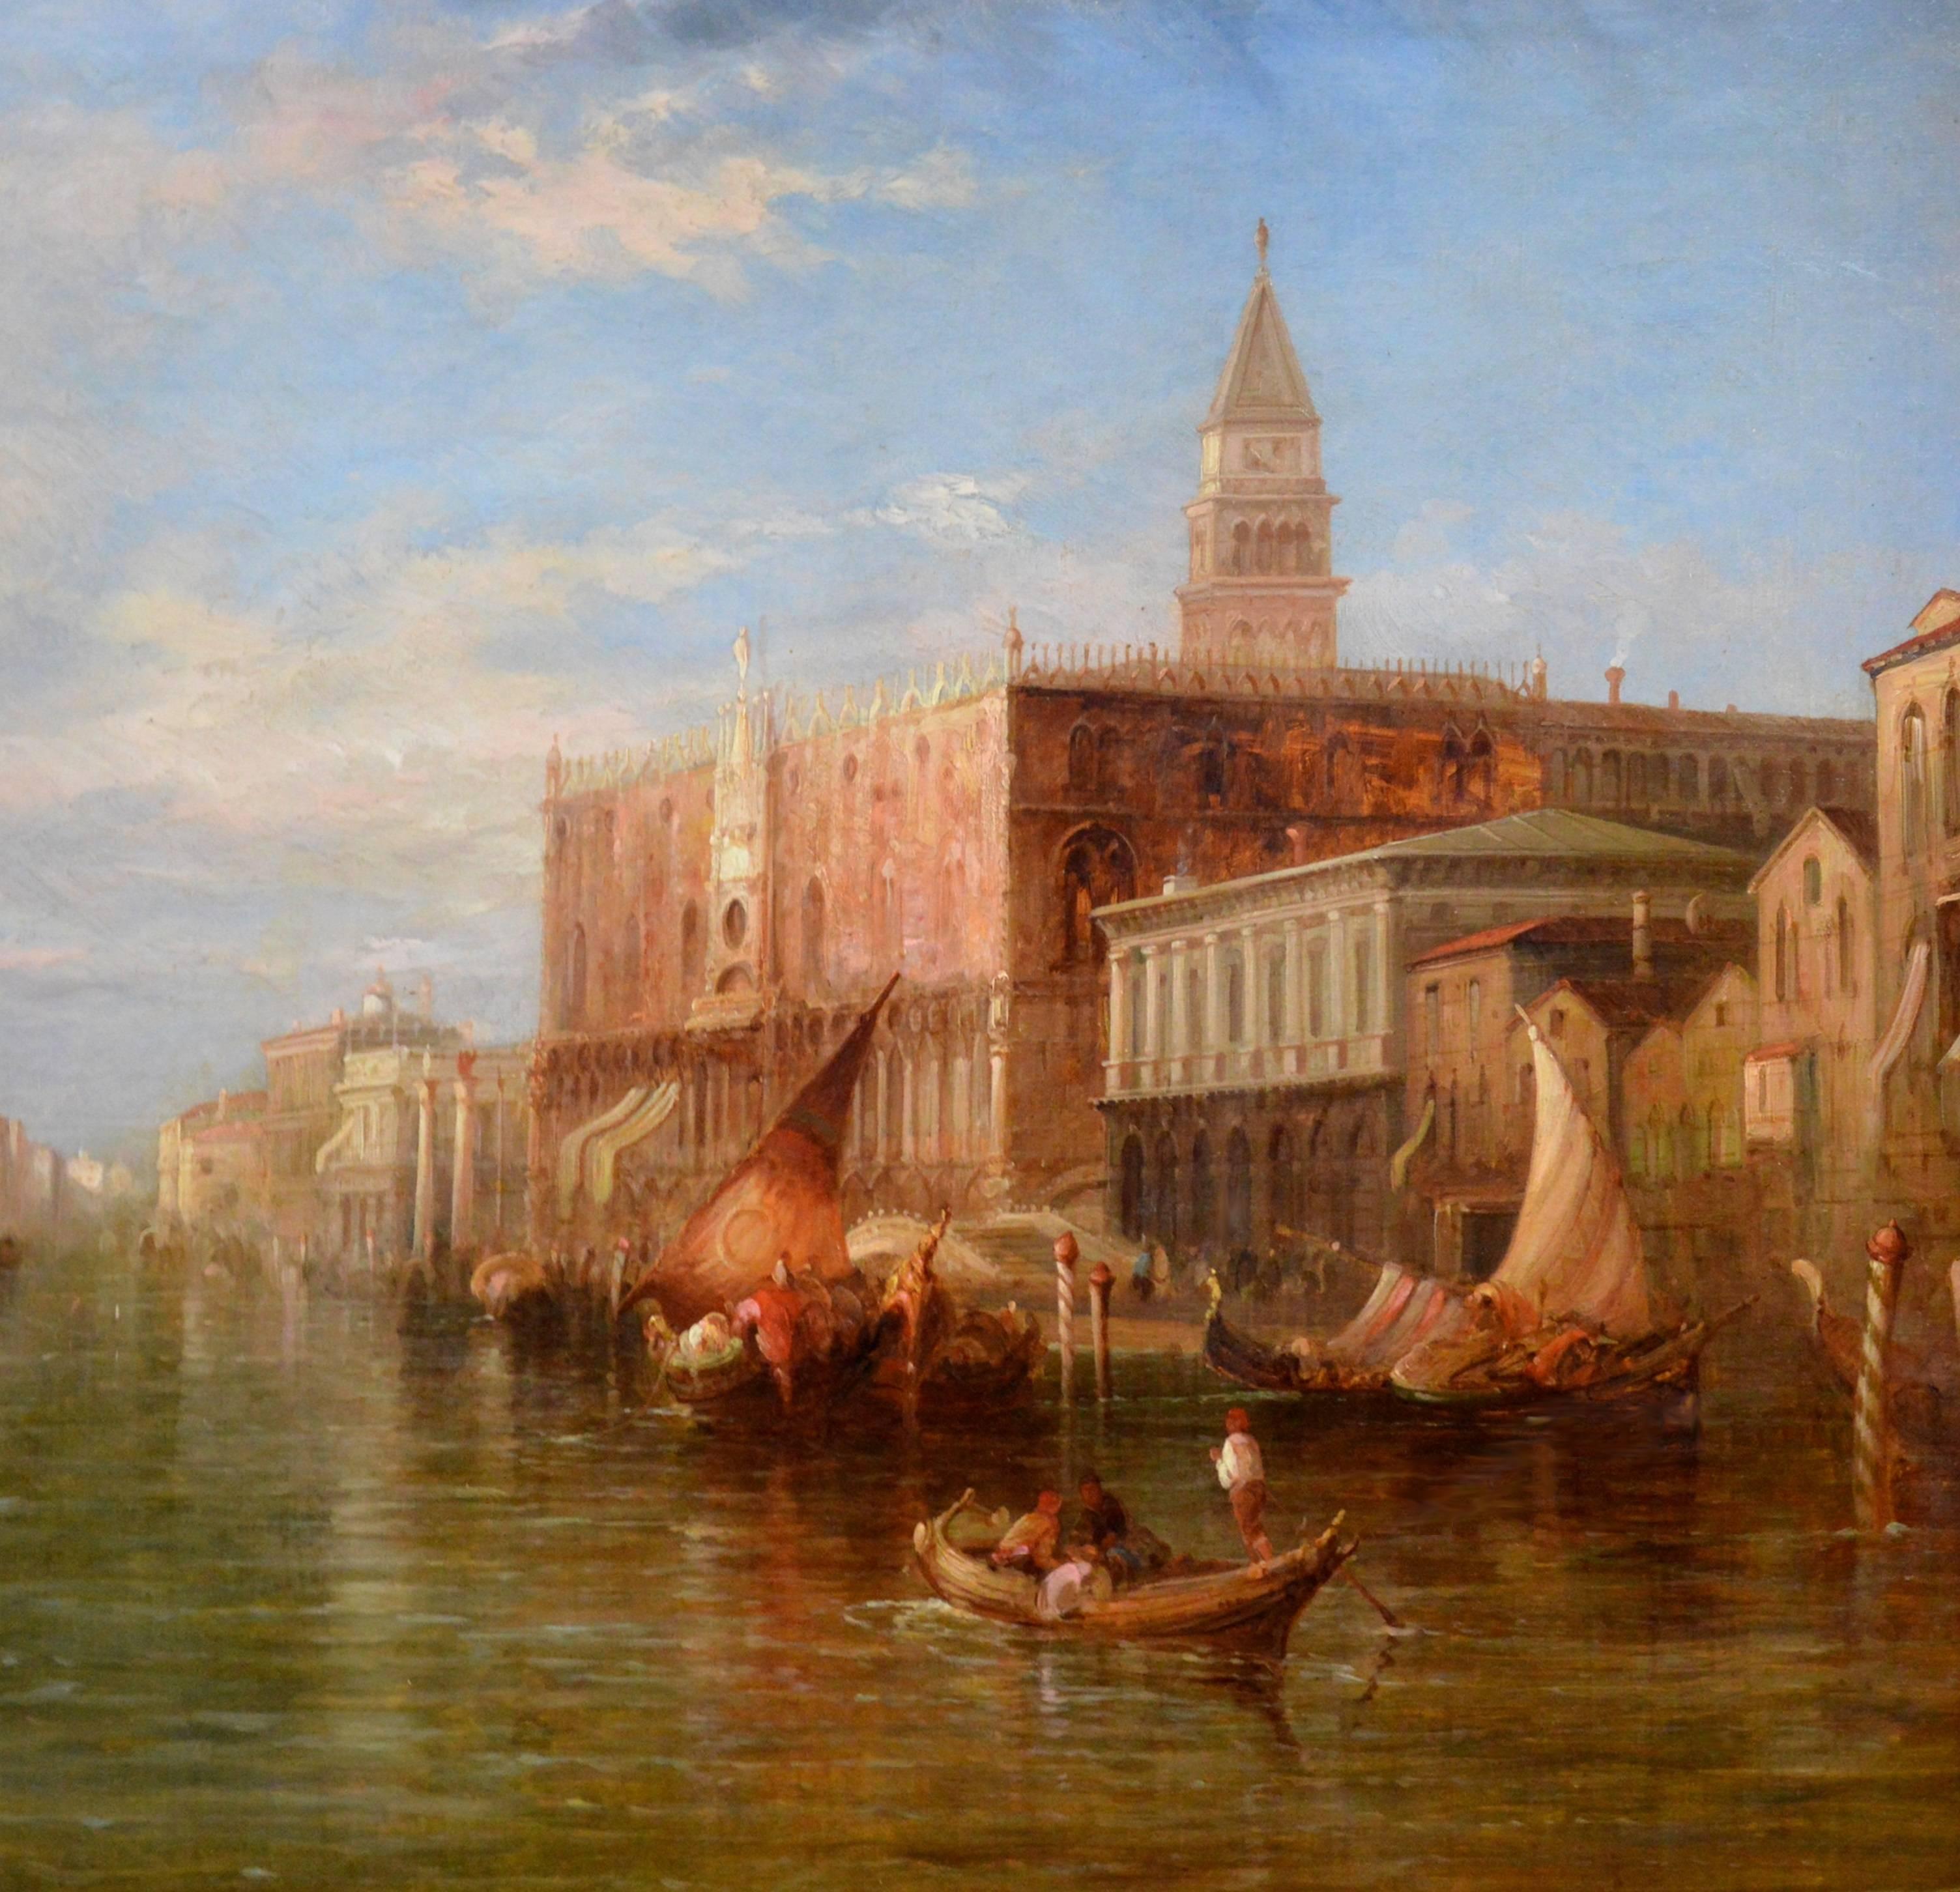 The Grand Canal - Venice - 19th Century Oil Painting - Alfred Pollentine 3